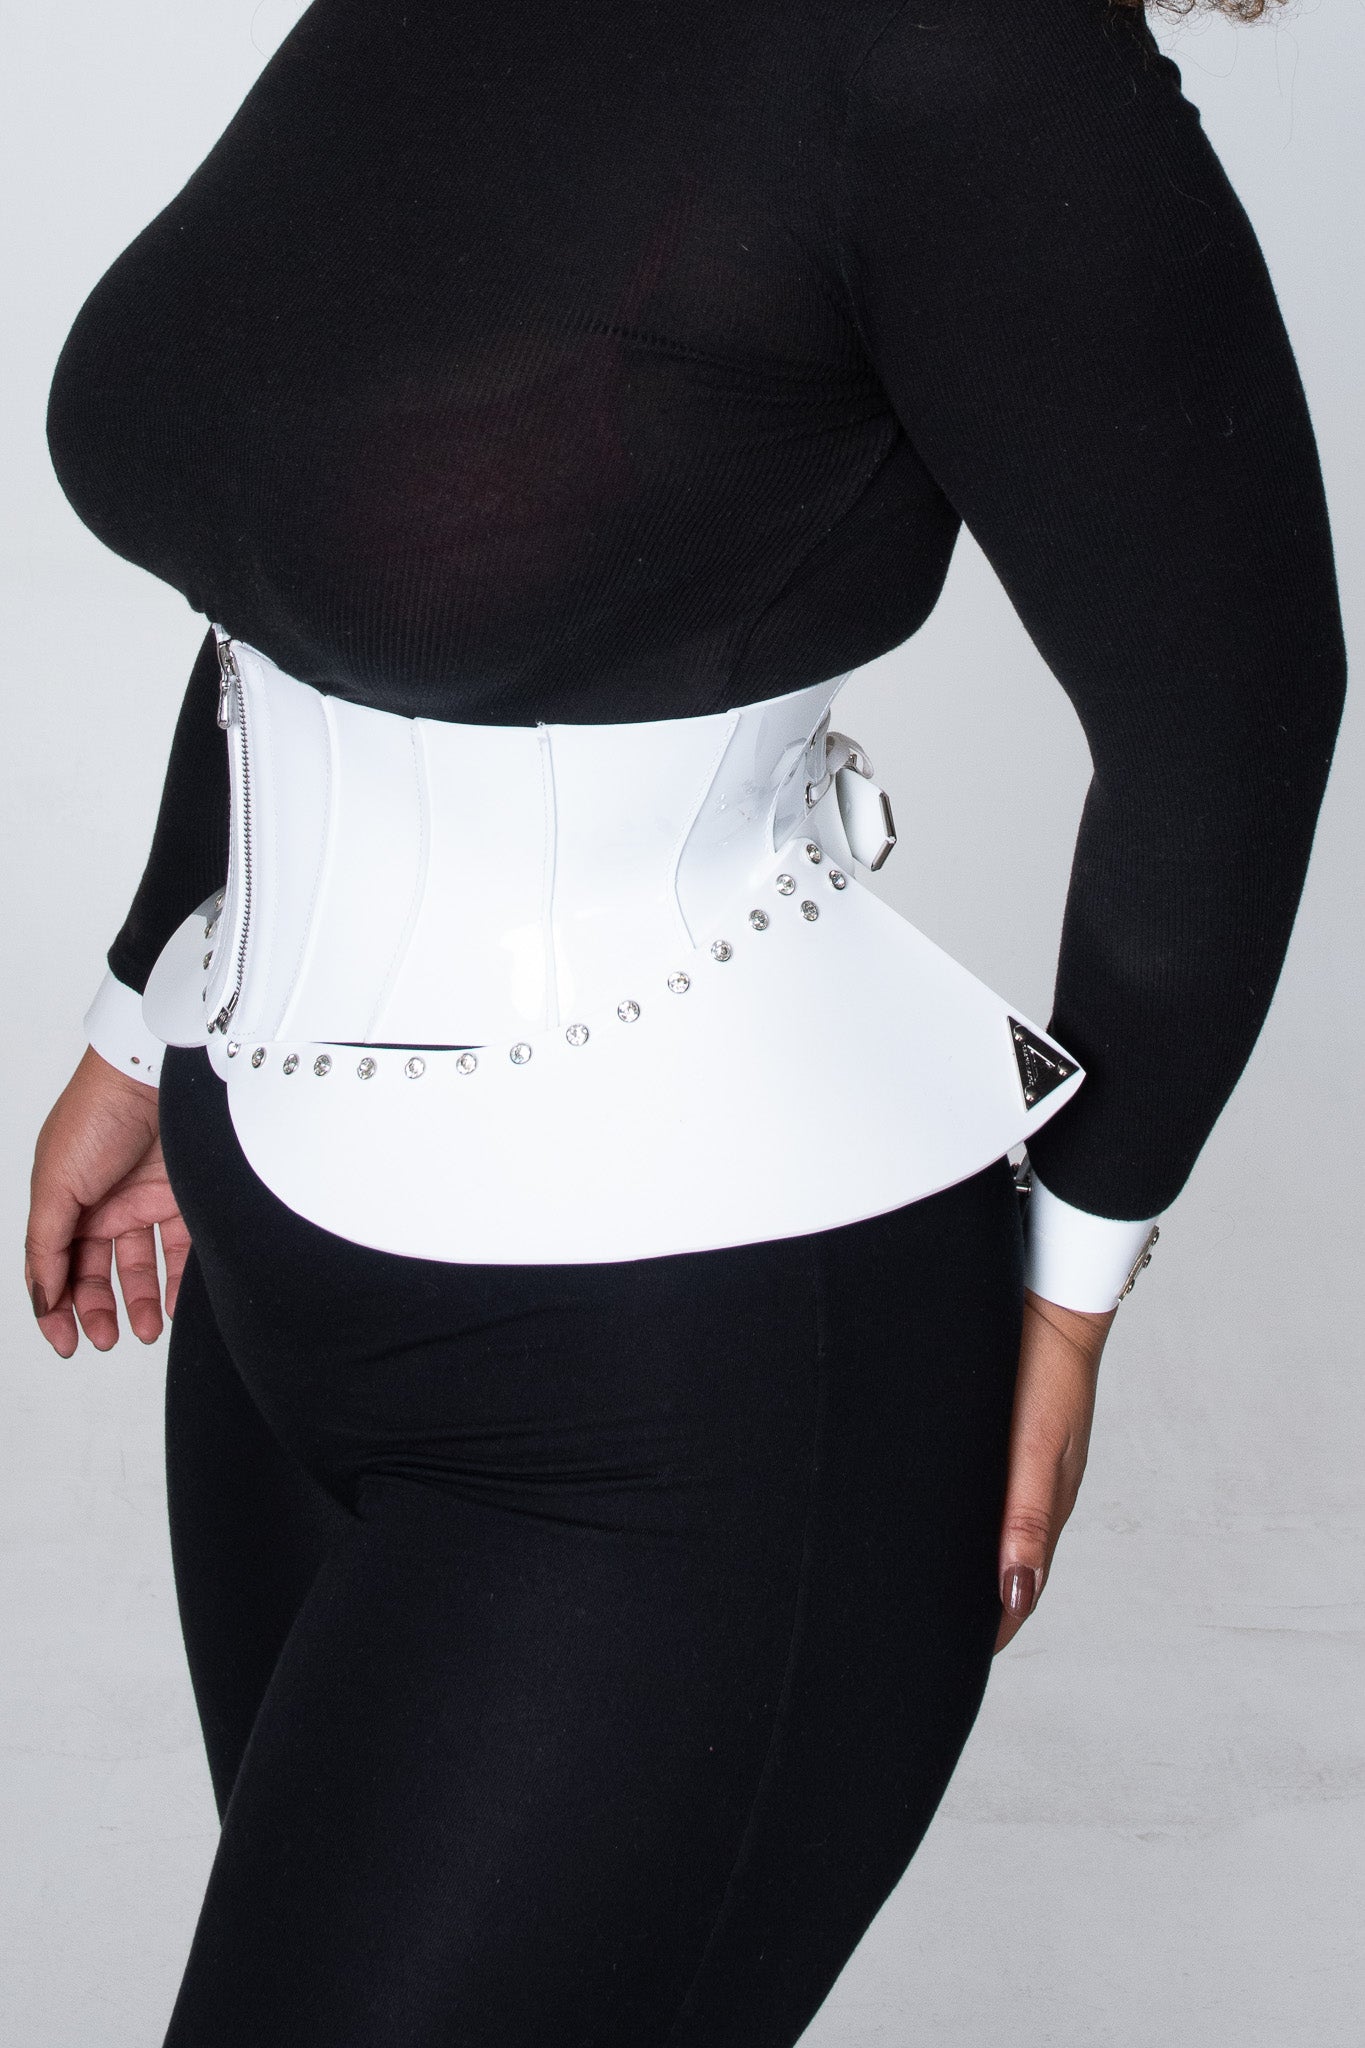 Sleek and modern shiny white Violetta corset belt designed to accentuate curves